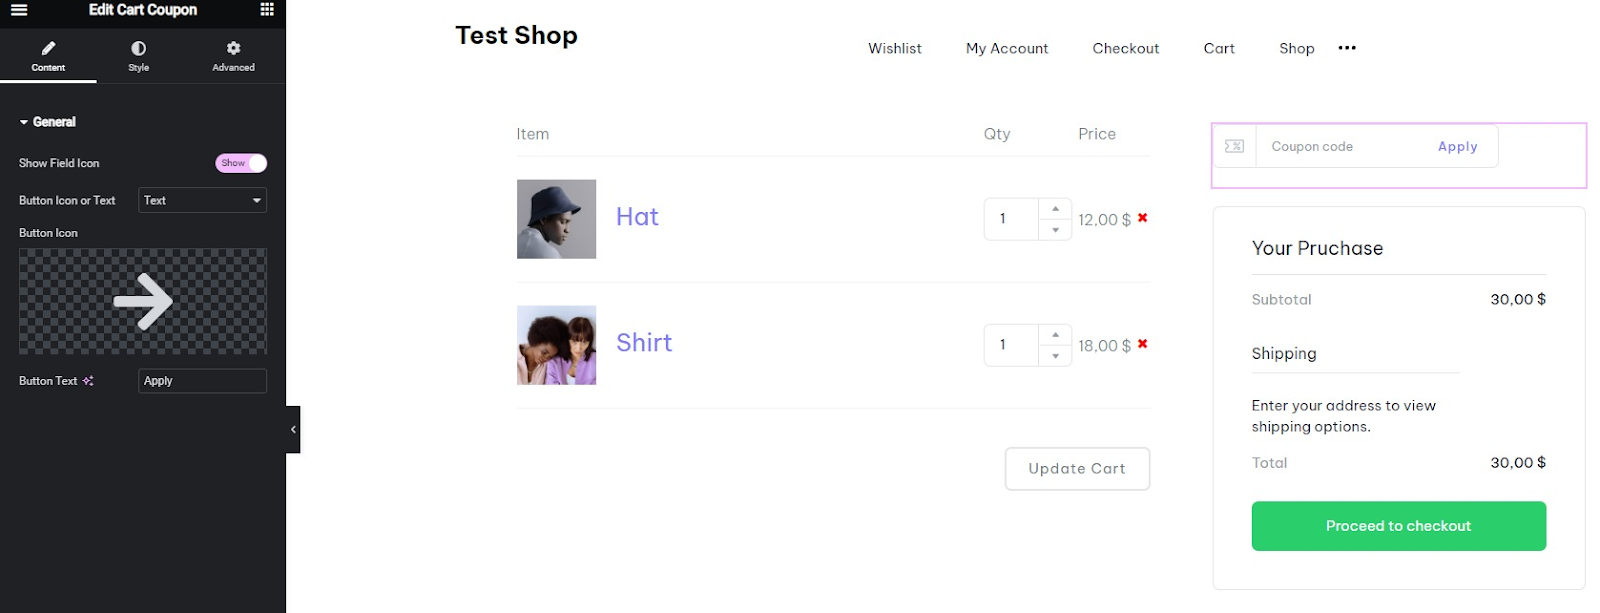 How to Customize WooCommerce Cart Page 23